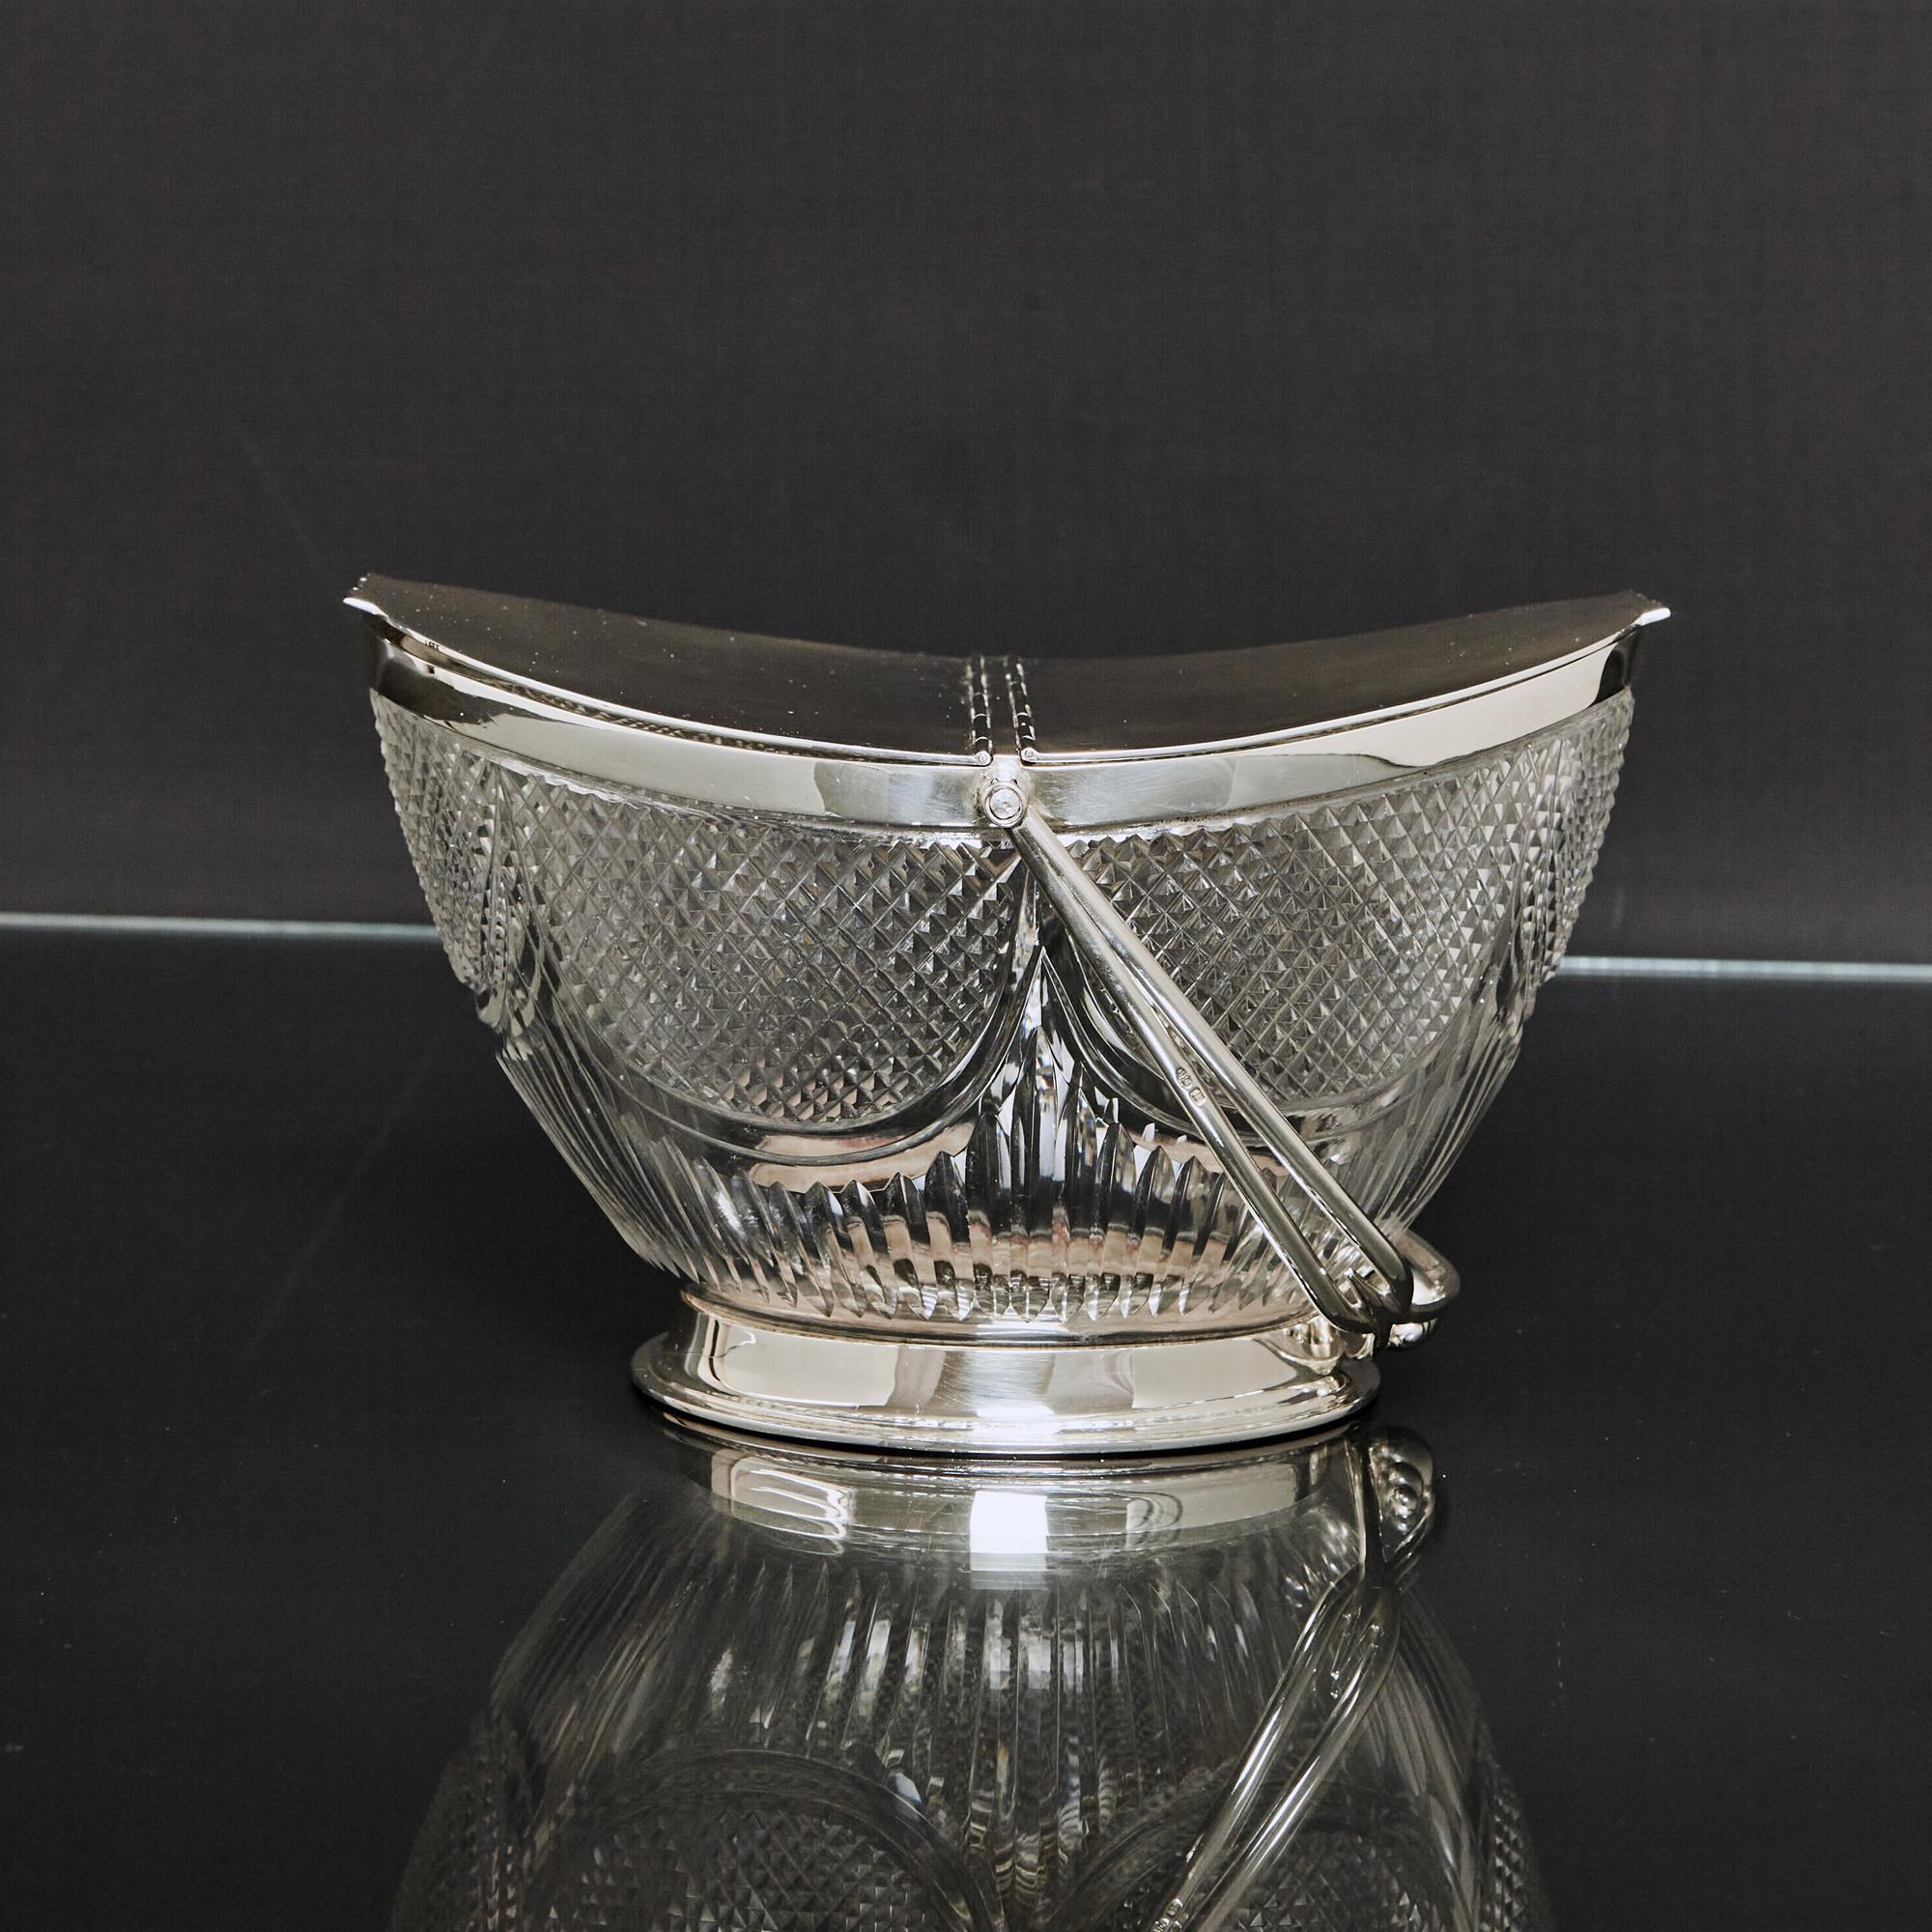 Edwardian, antique cut glass box of oval, boat-shaped form - a fruit basket or biscuit box. The cut glass body is decorated with elliptical panels of a crisply cut diamond pattern, and vertical fluting. The body is fitted with silver mounts, a swing